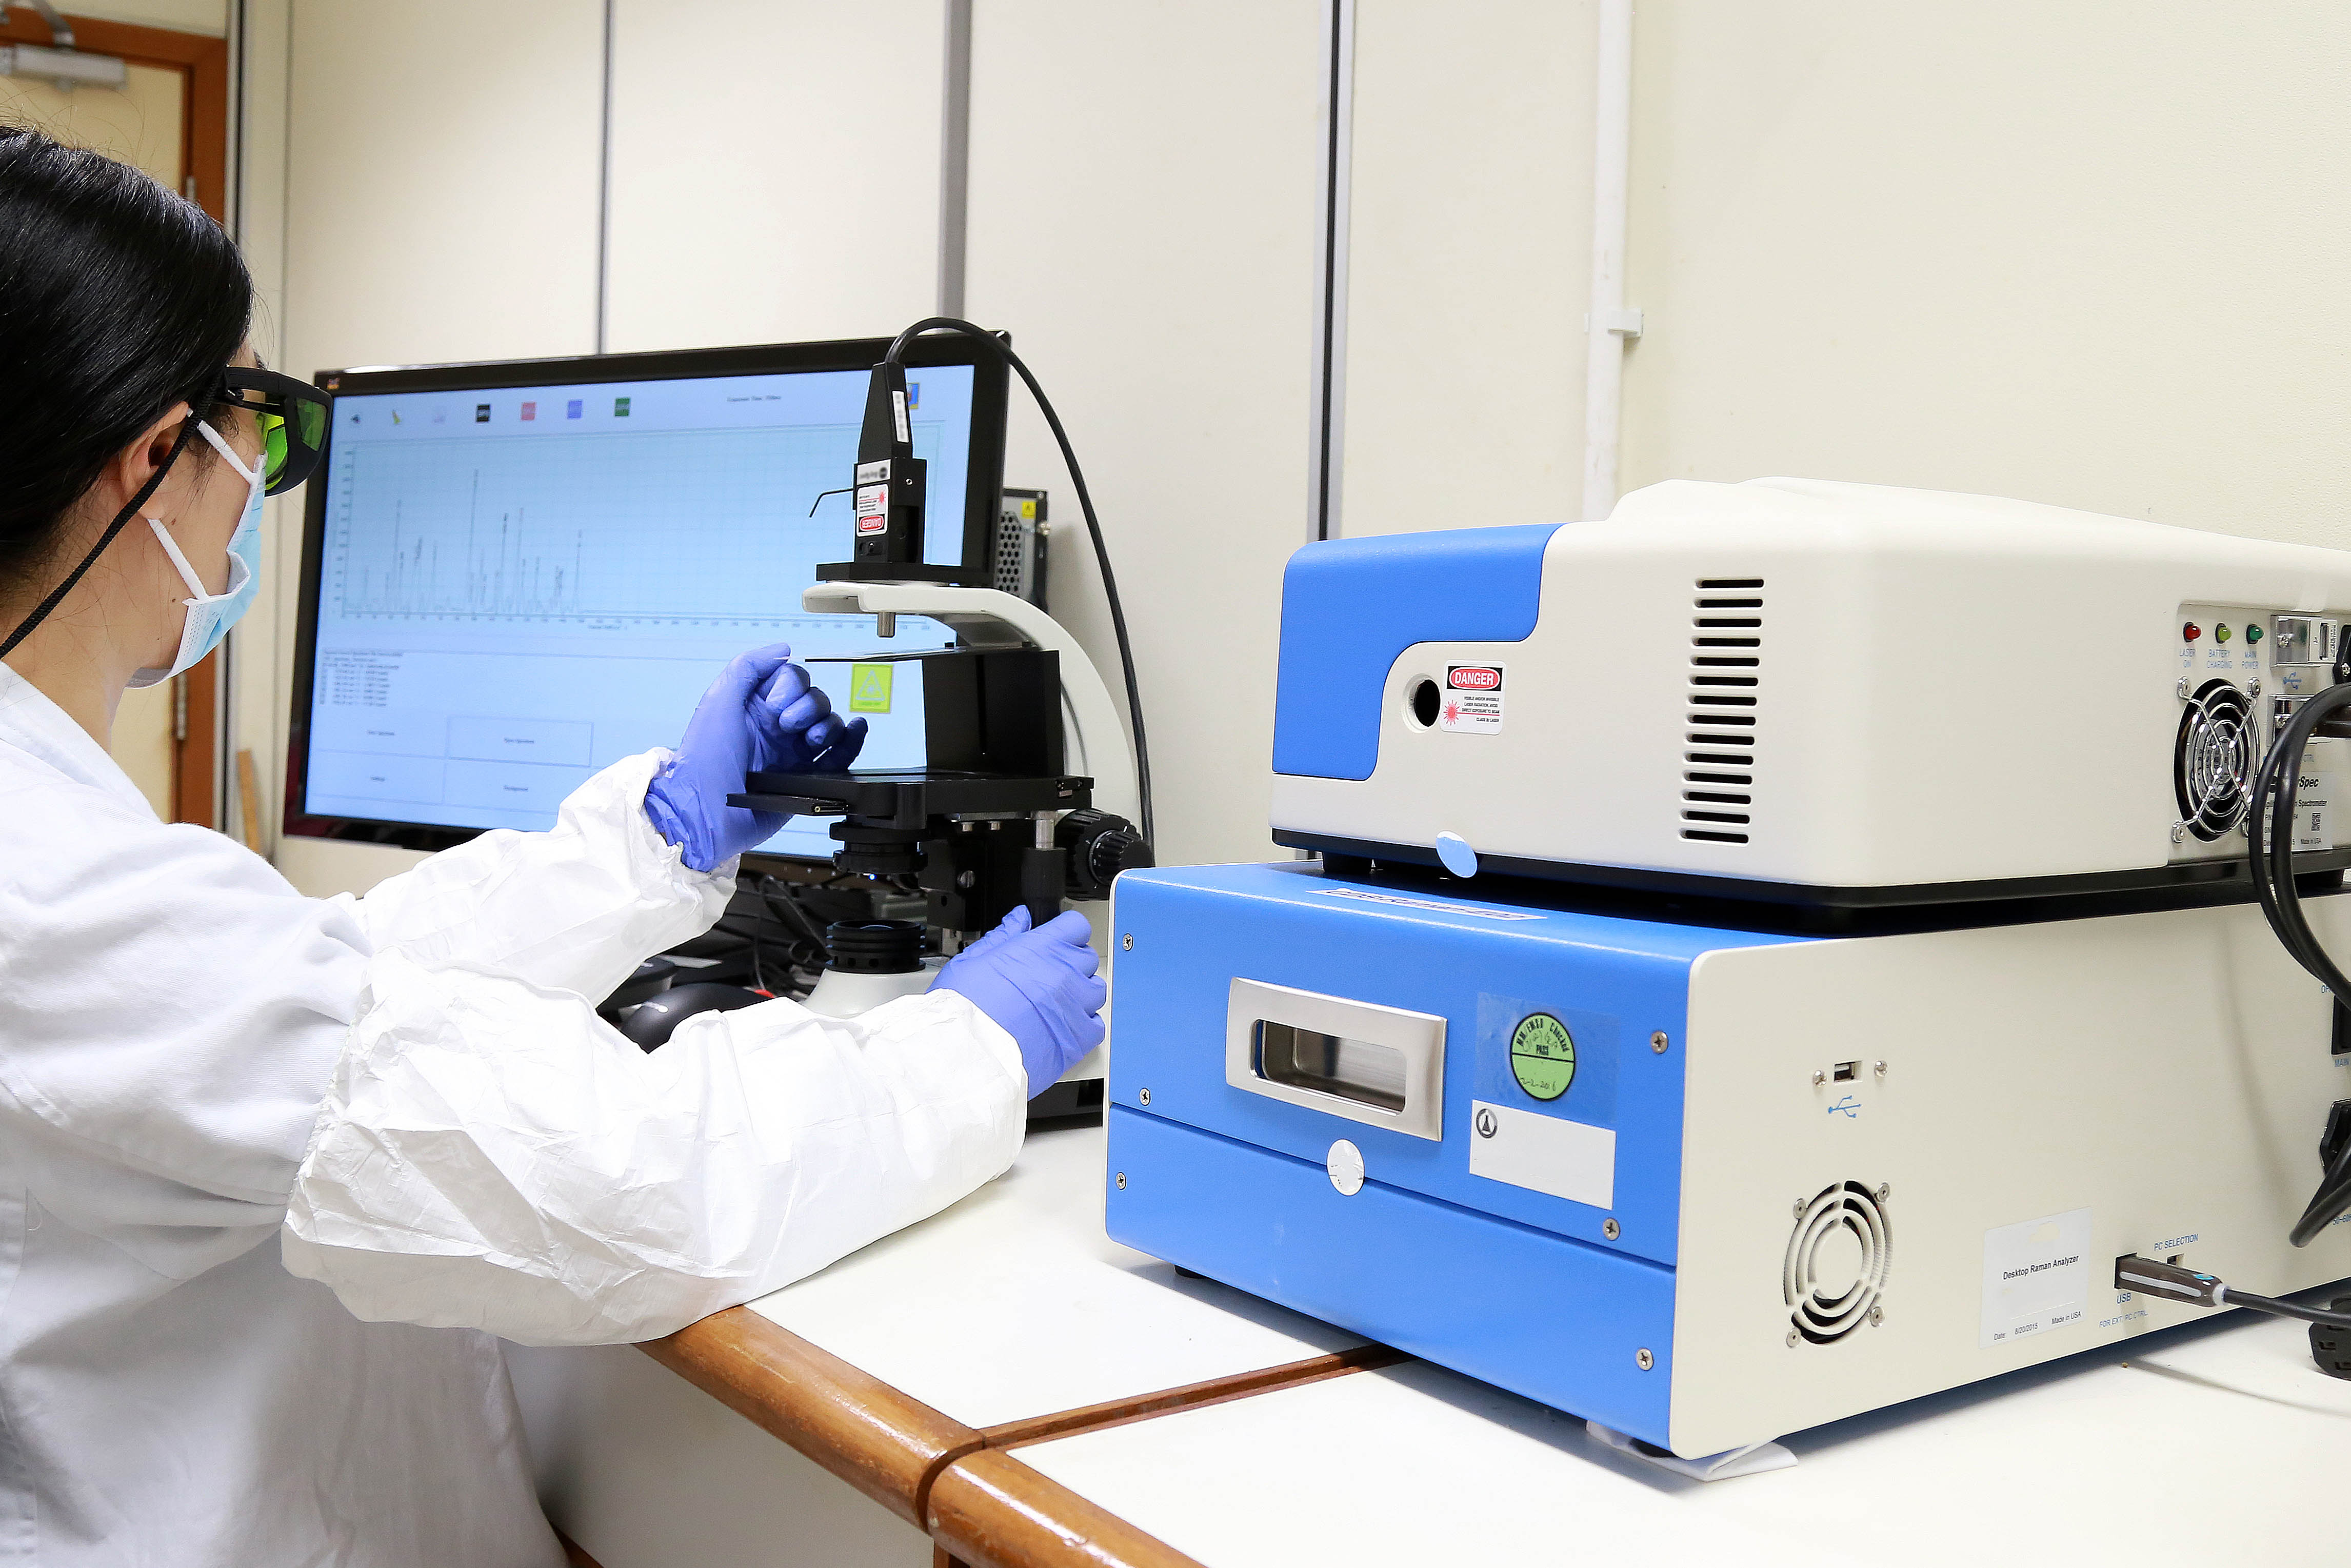 A staff is using a Raman spectrometer for controlled drugs analysis